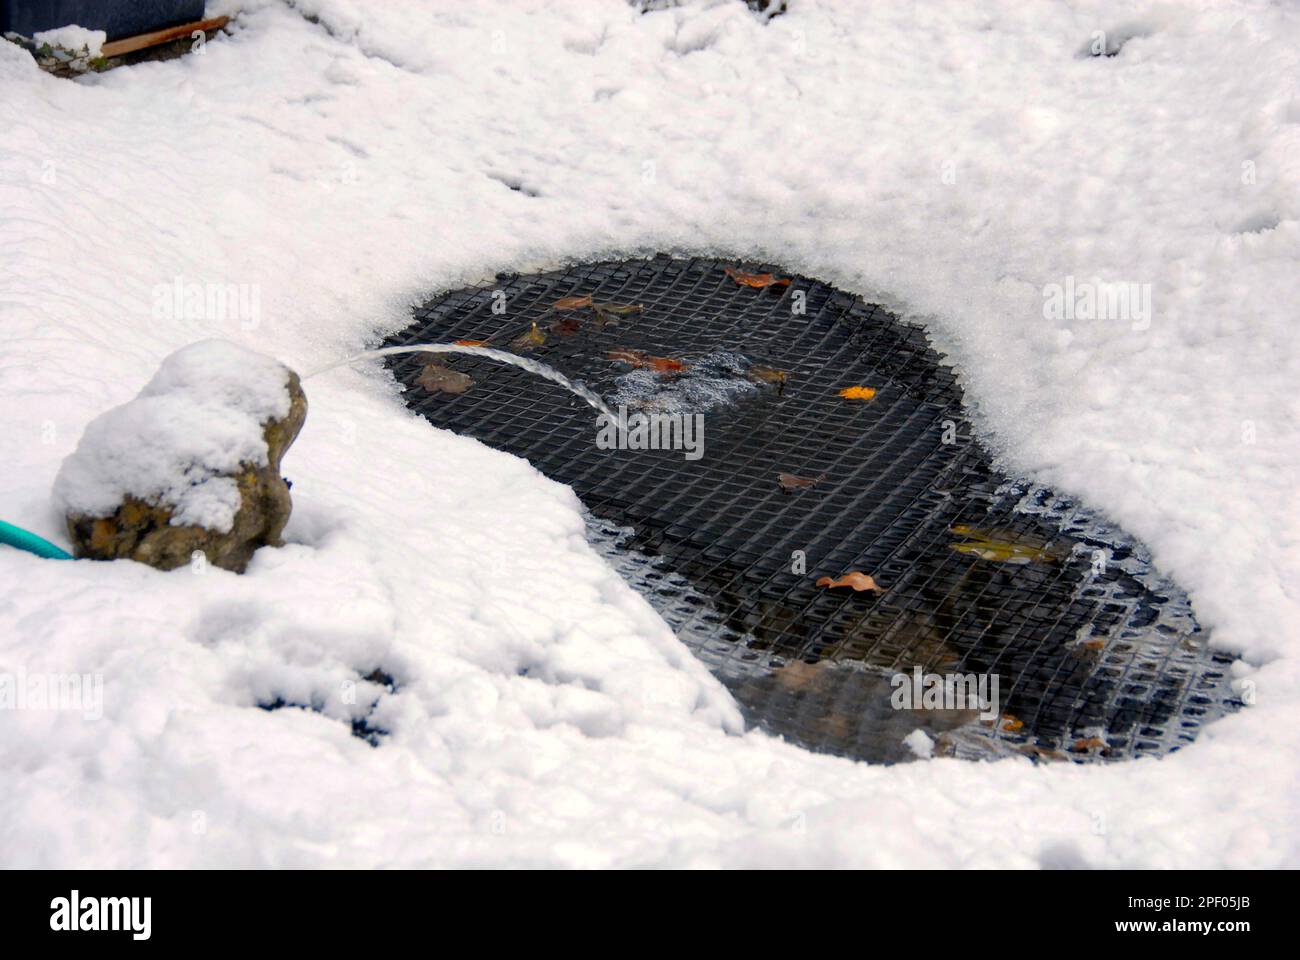 Netted garden pond with accumulated snow in winter, held in place by the net, with a stream of water keeping the pond partly open Stock Photo